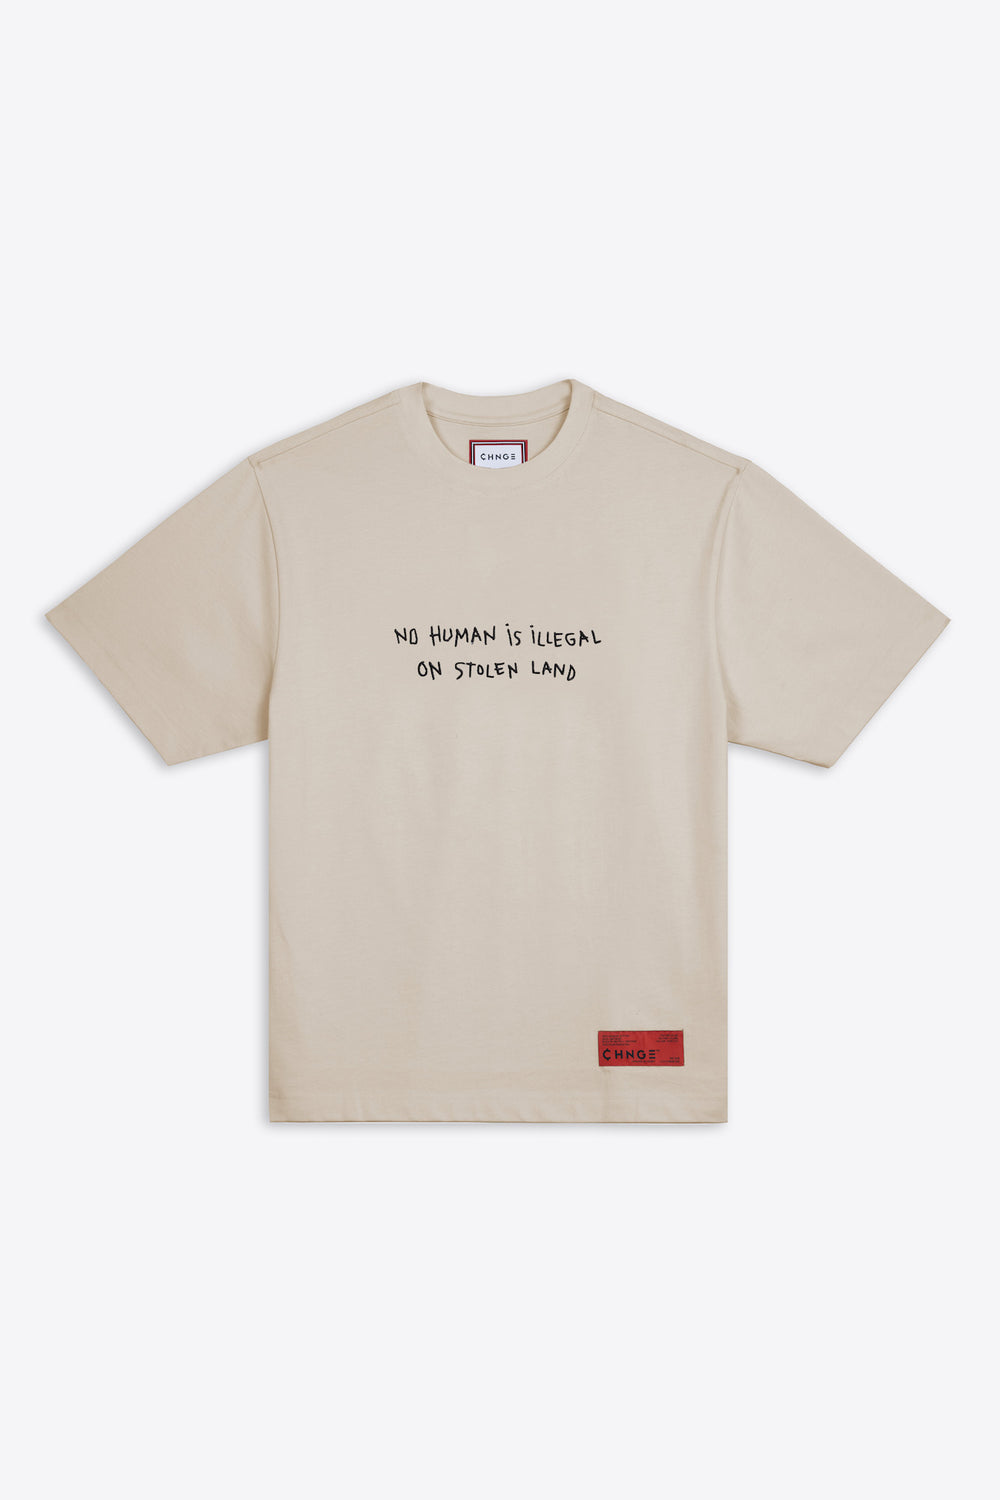 No Human is Illegal S/S Tee (Ash)